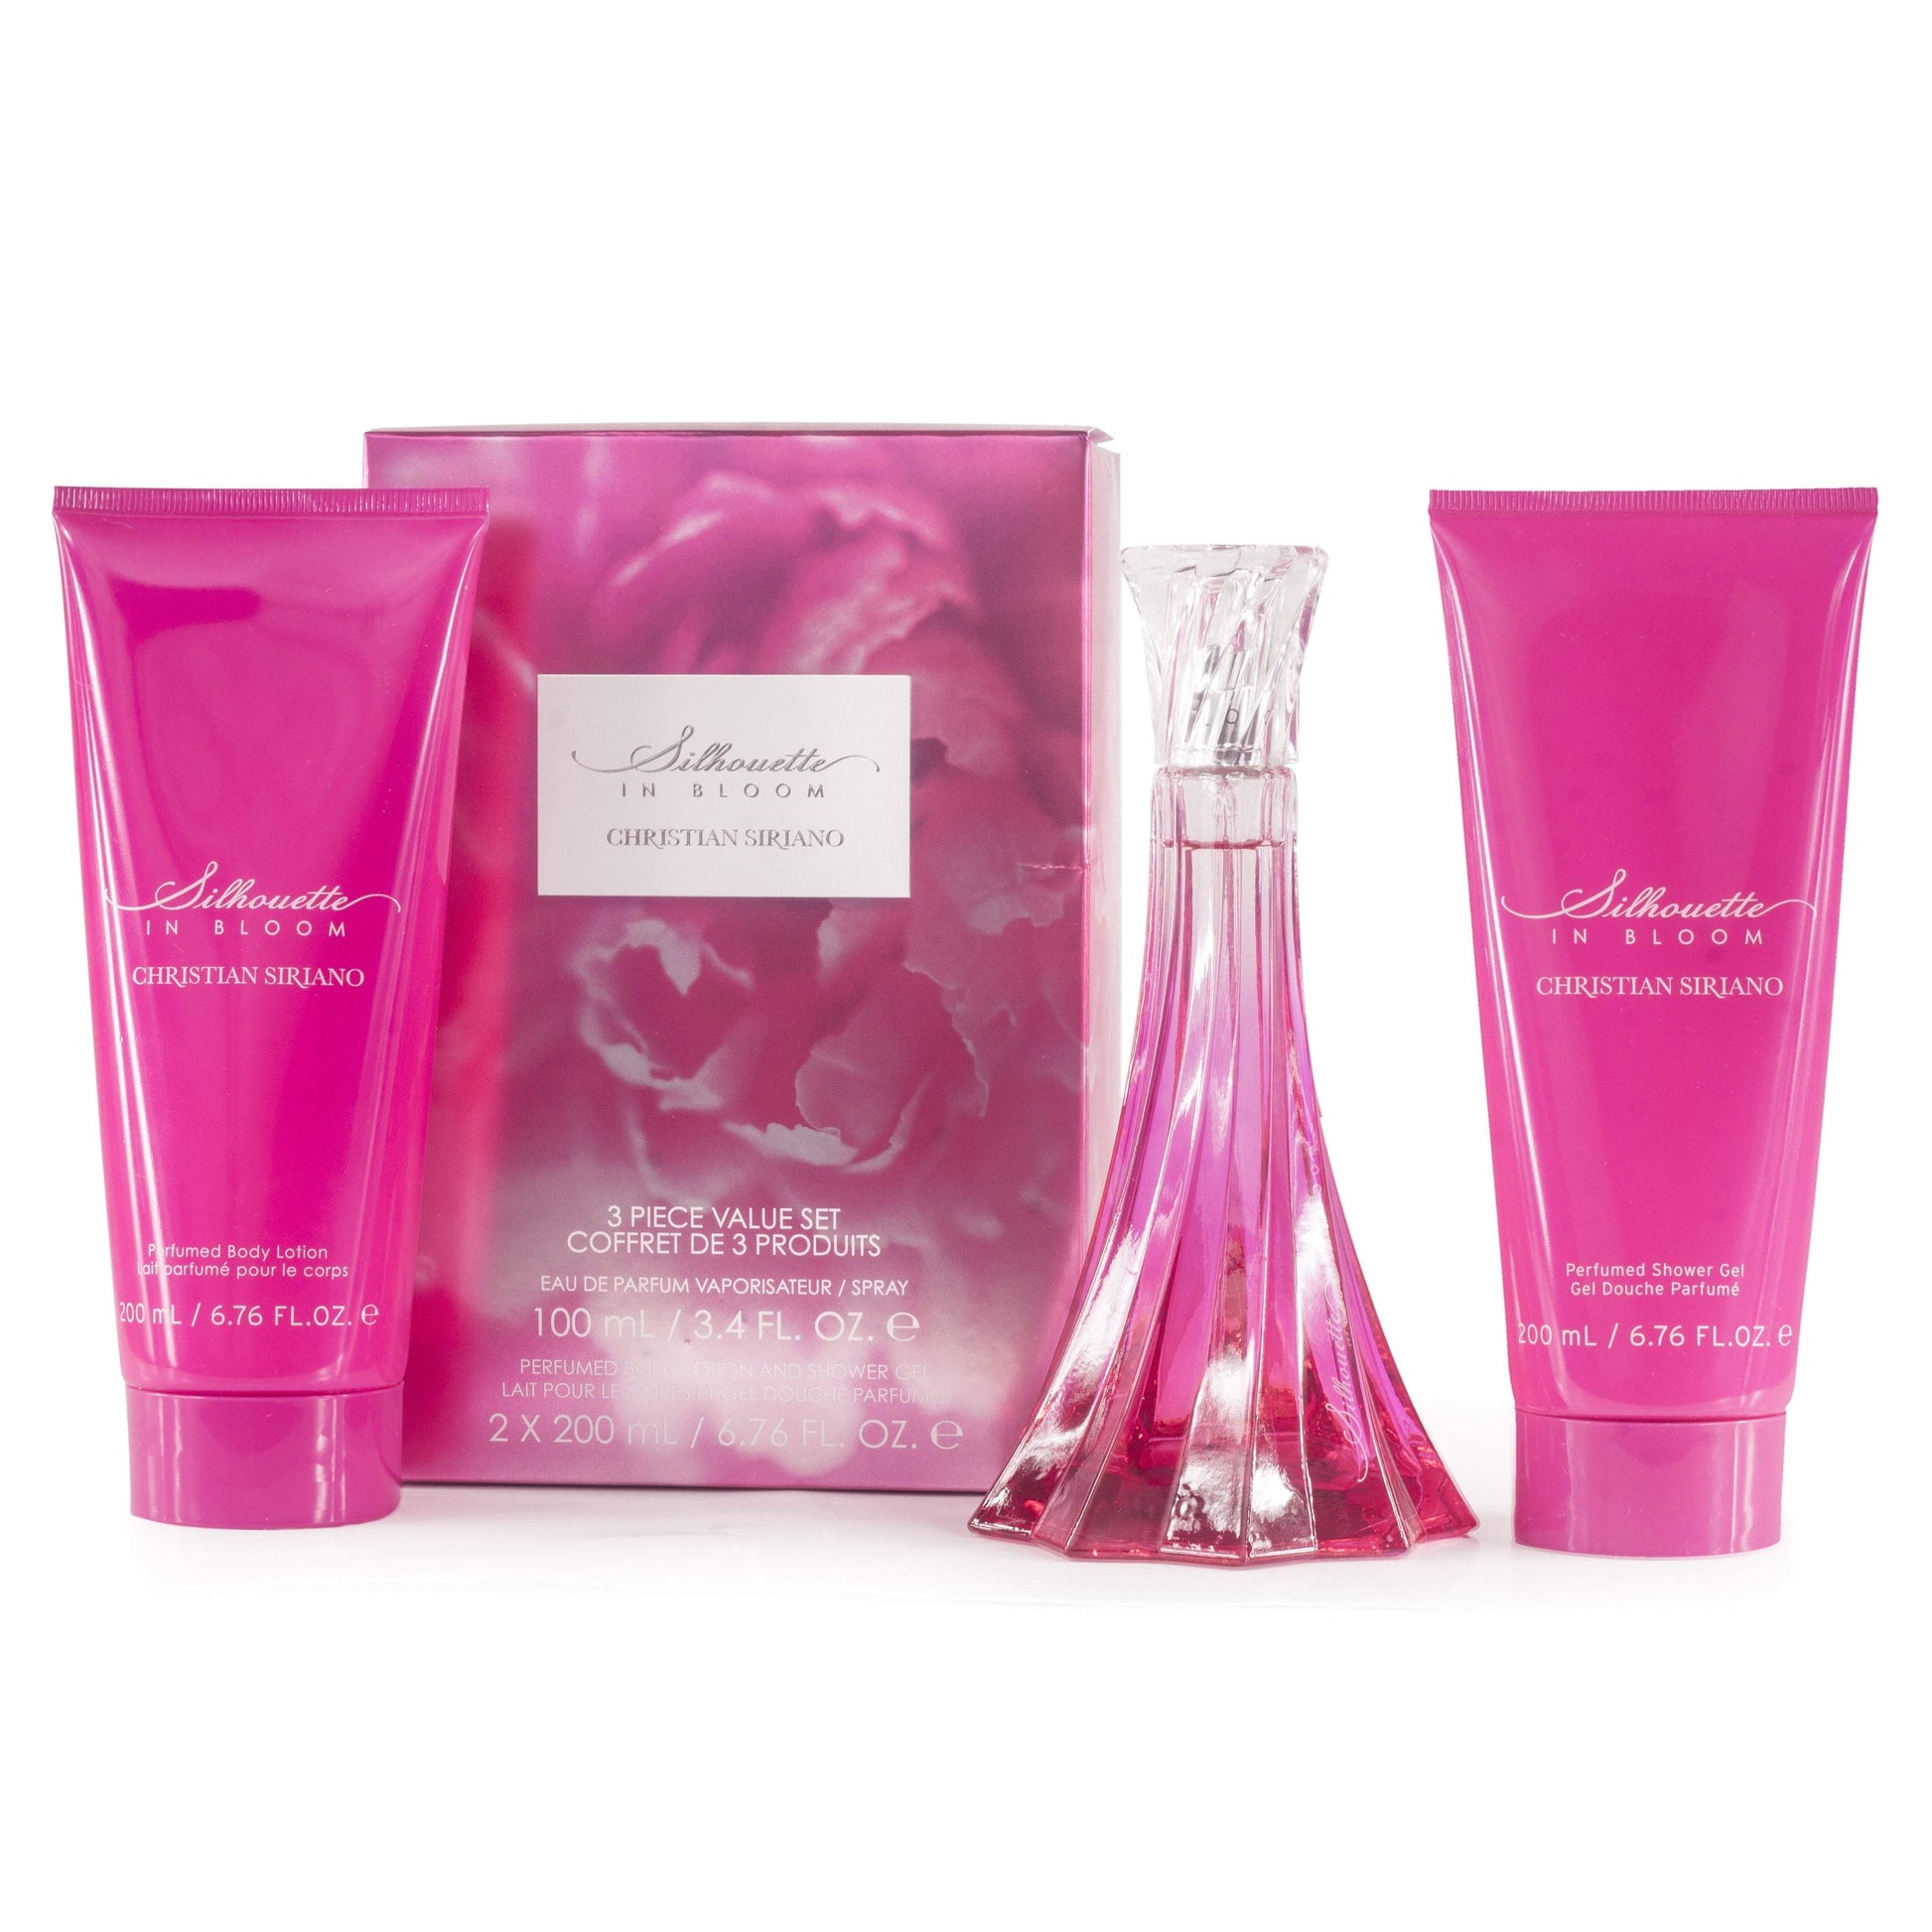 Silhouette in Bloom Gift Set for Women by Christian Siriano, Product image 1